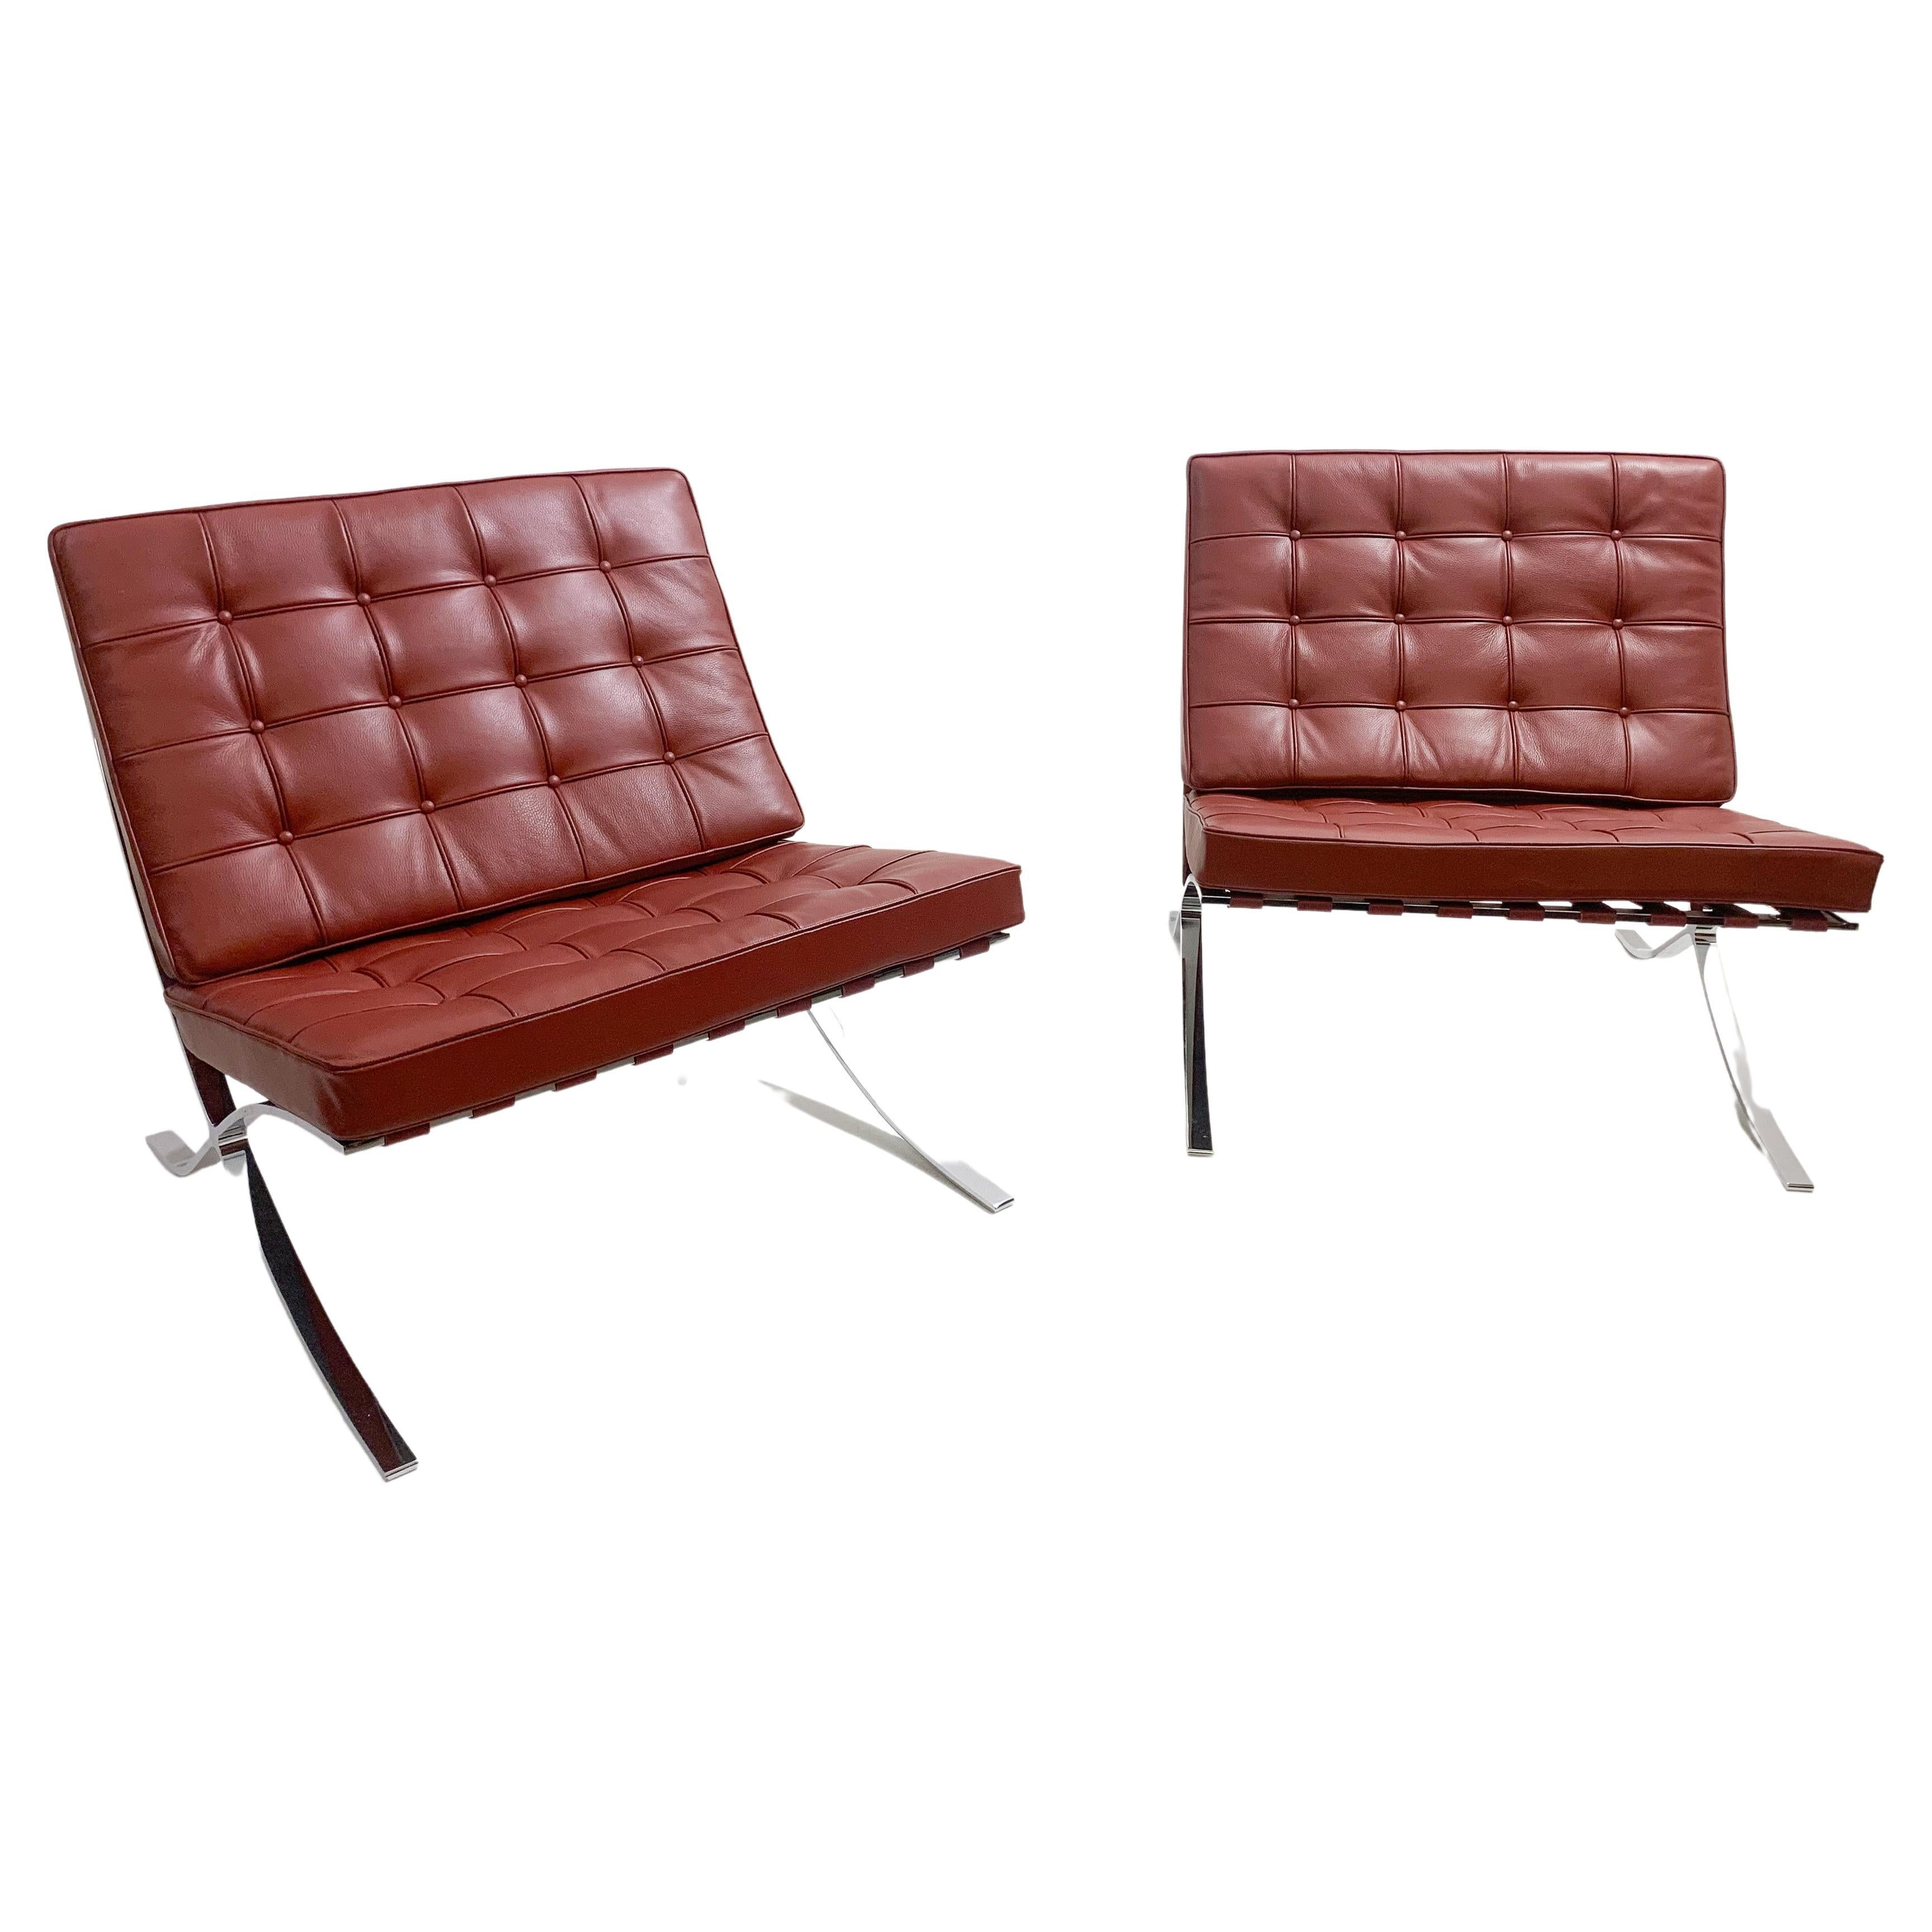 Pair of Burgundy Leather Barcelona Chairs by Mies Van Der Rohe for Knoll, 1990s For Sale